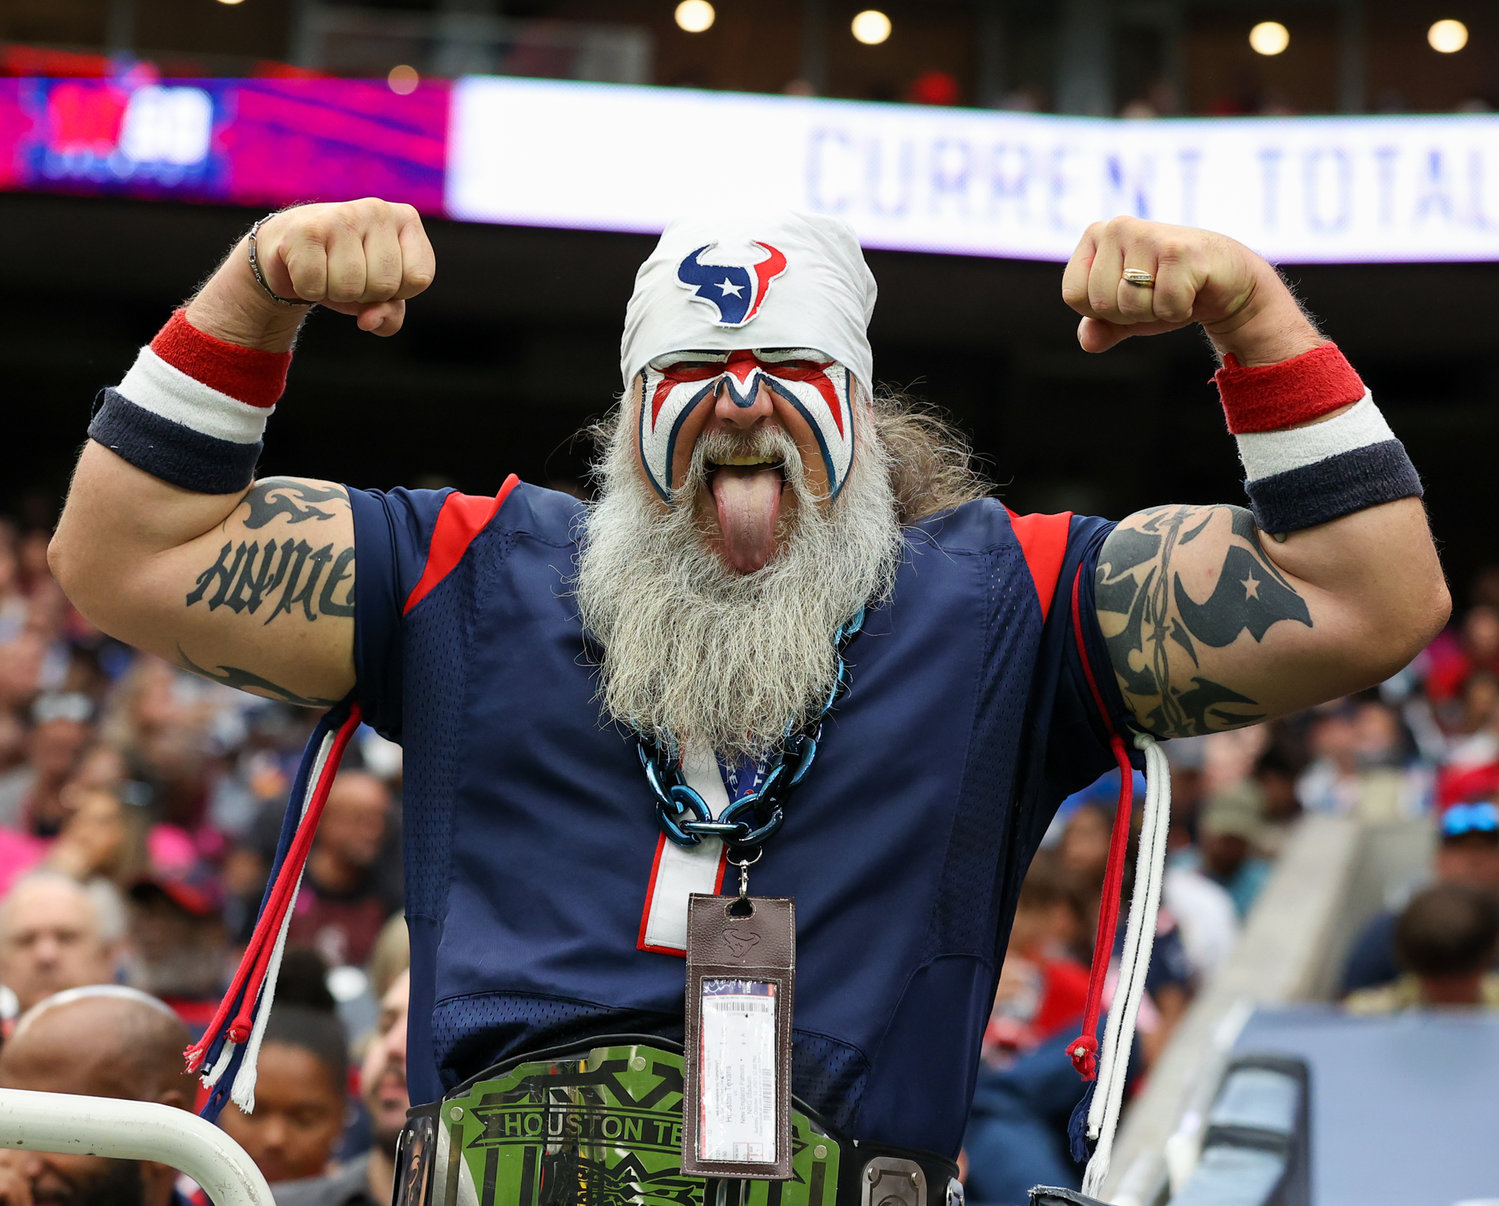 The Houston Texans Ultimate Fan during an NFL game between Houston and New England on October 10, 2021 in Houston, Texas. The Patriots won 25-22.